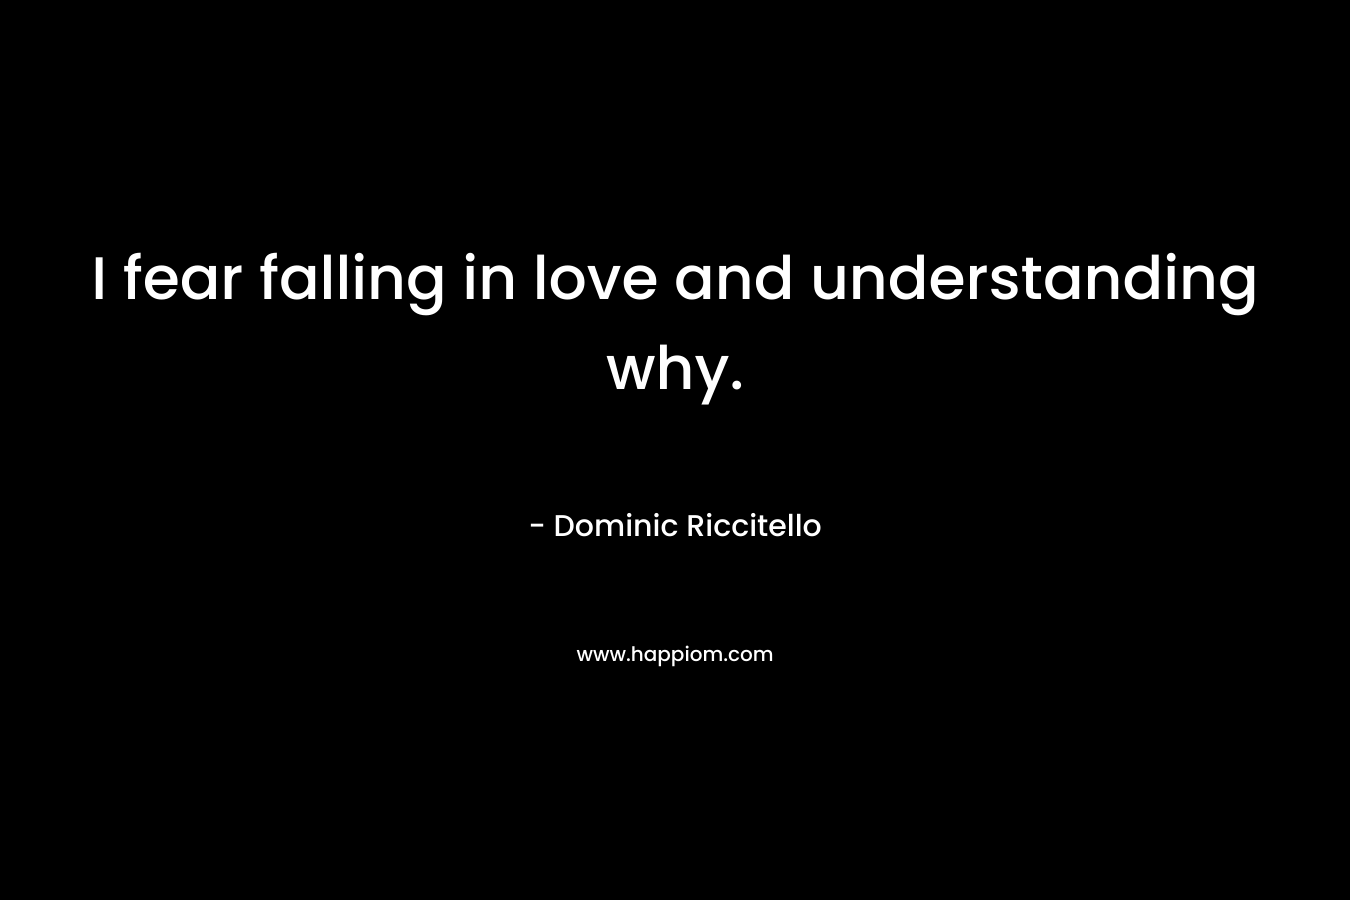 I fear falling in love and understanding why.